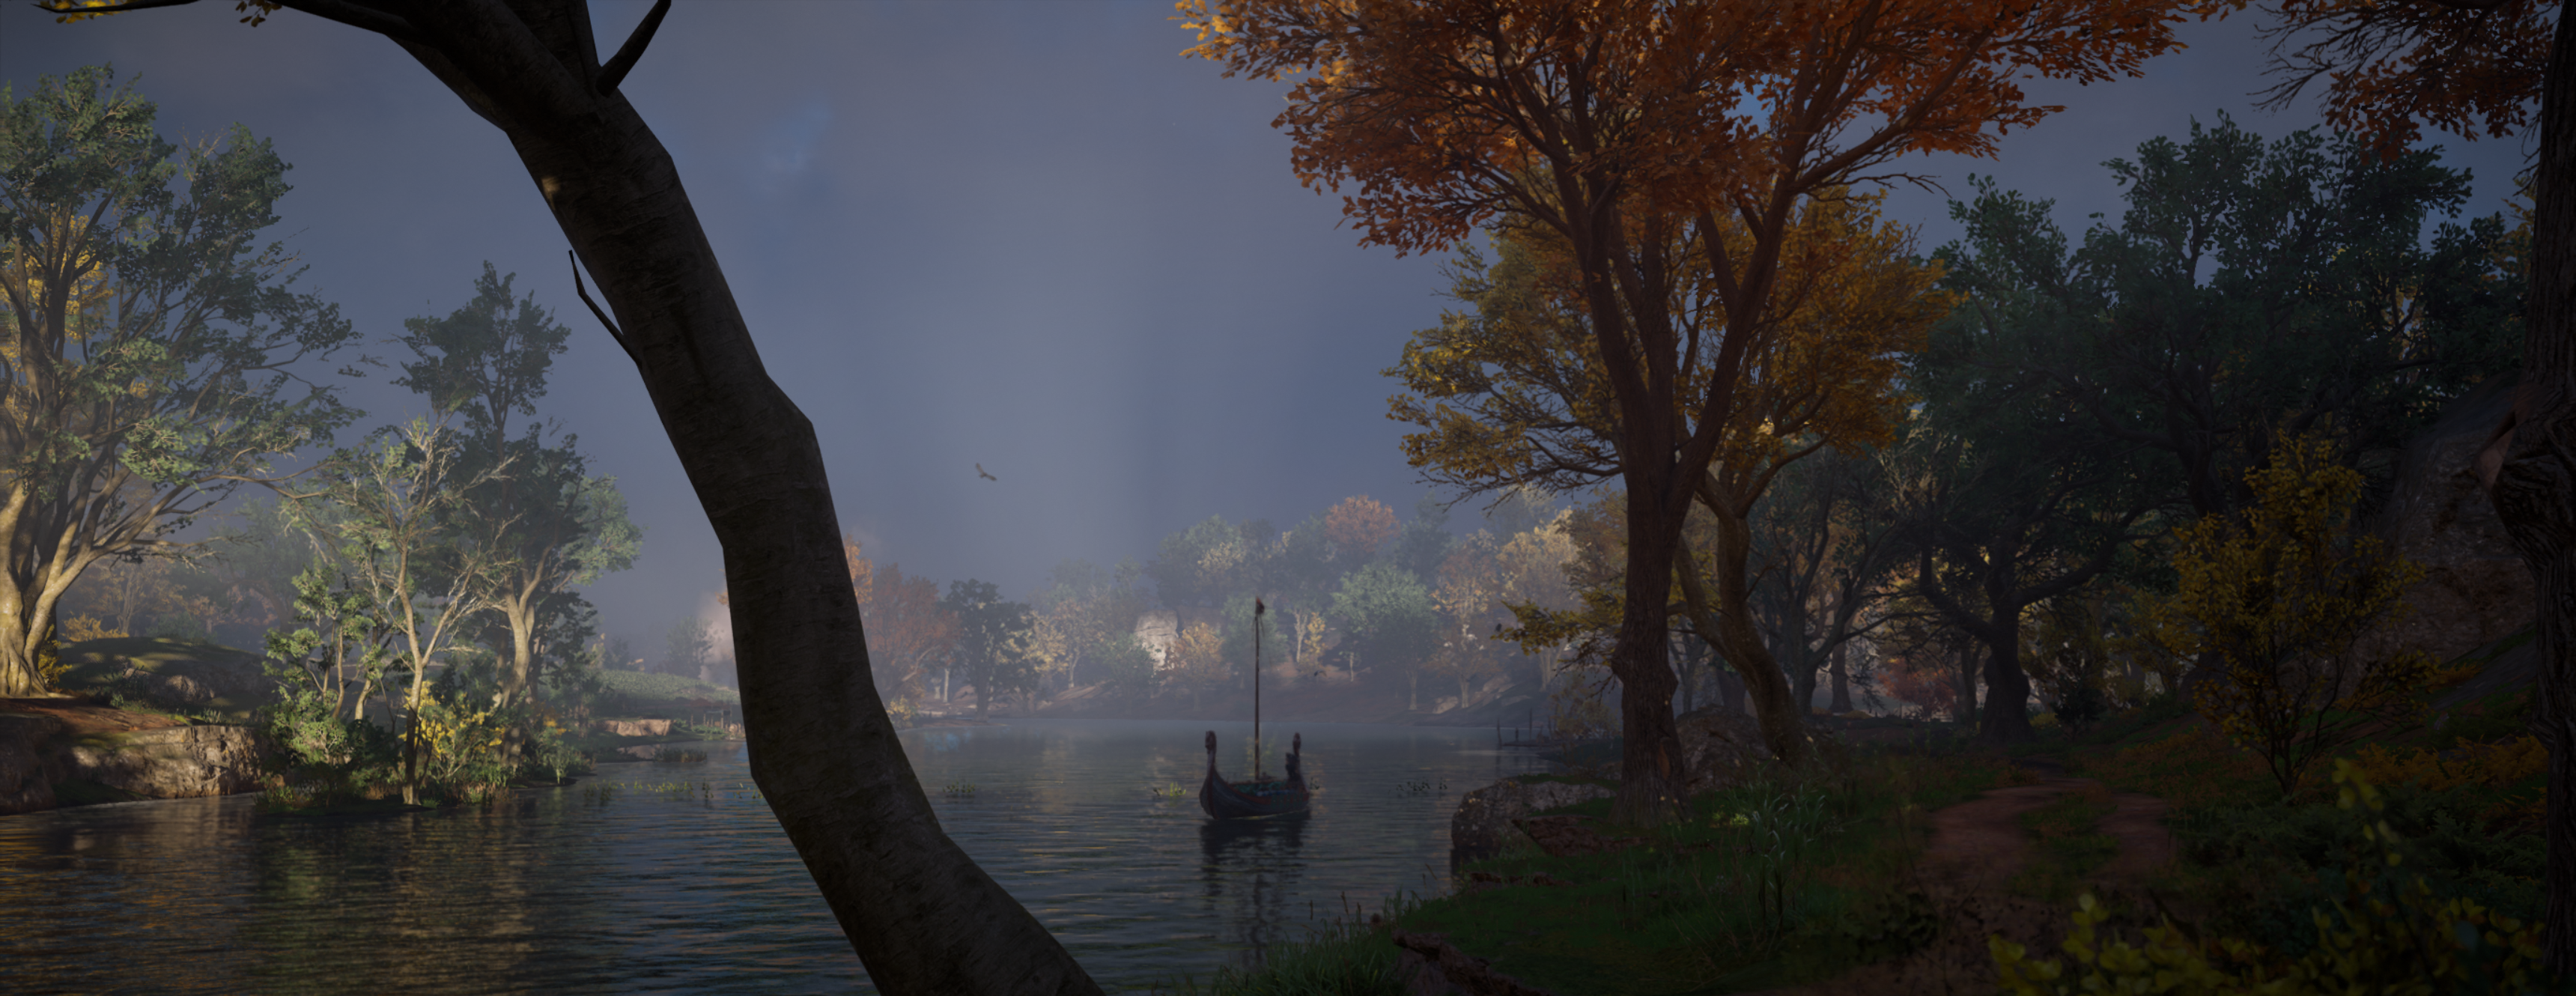 General 3440x1330 Assassin's Creed: Valhalla Assassin's Creed landscape water sky trees fall boat longships PC gaming video games video game landscape